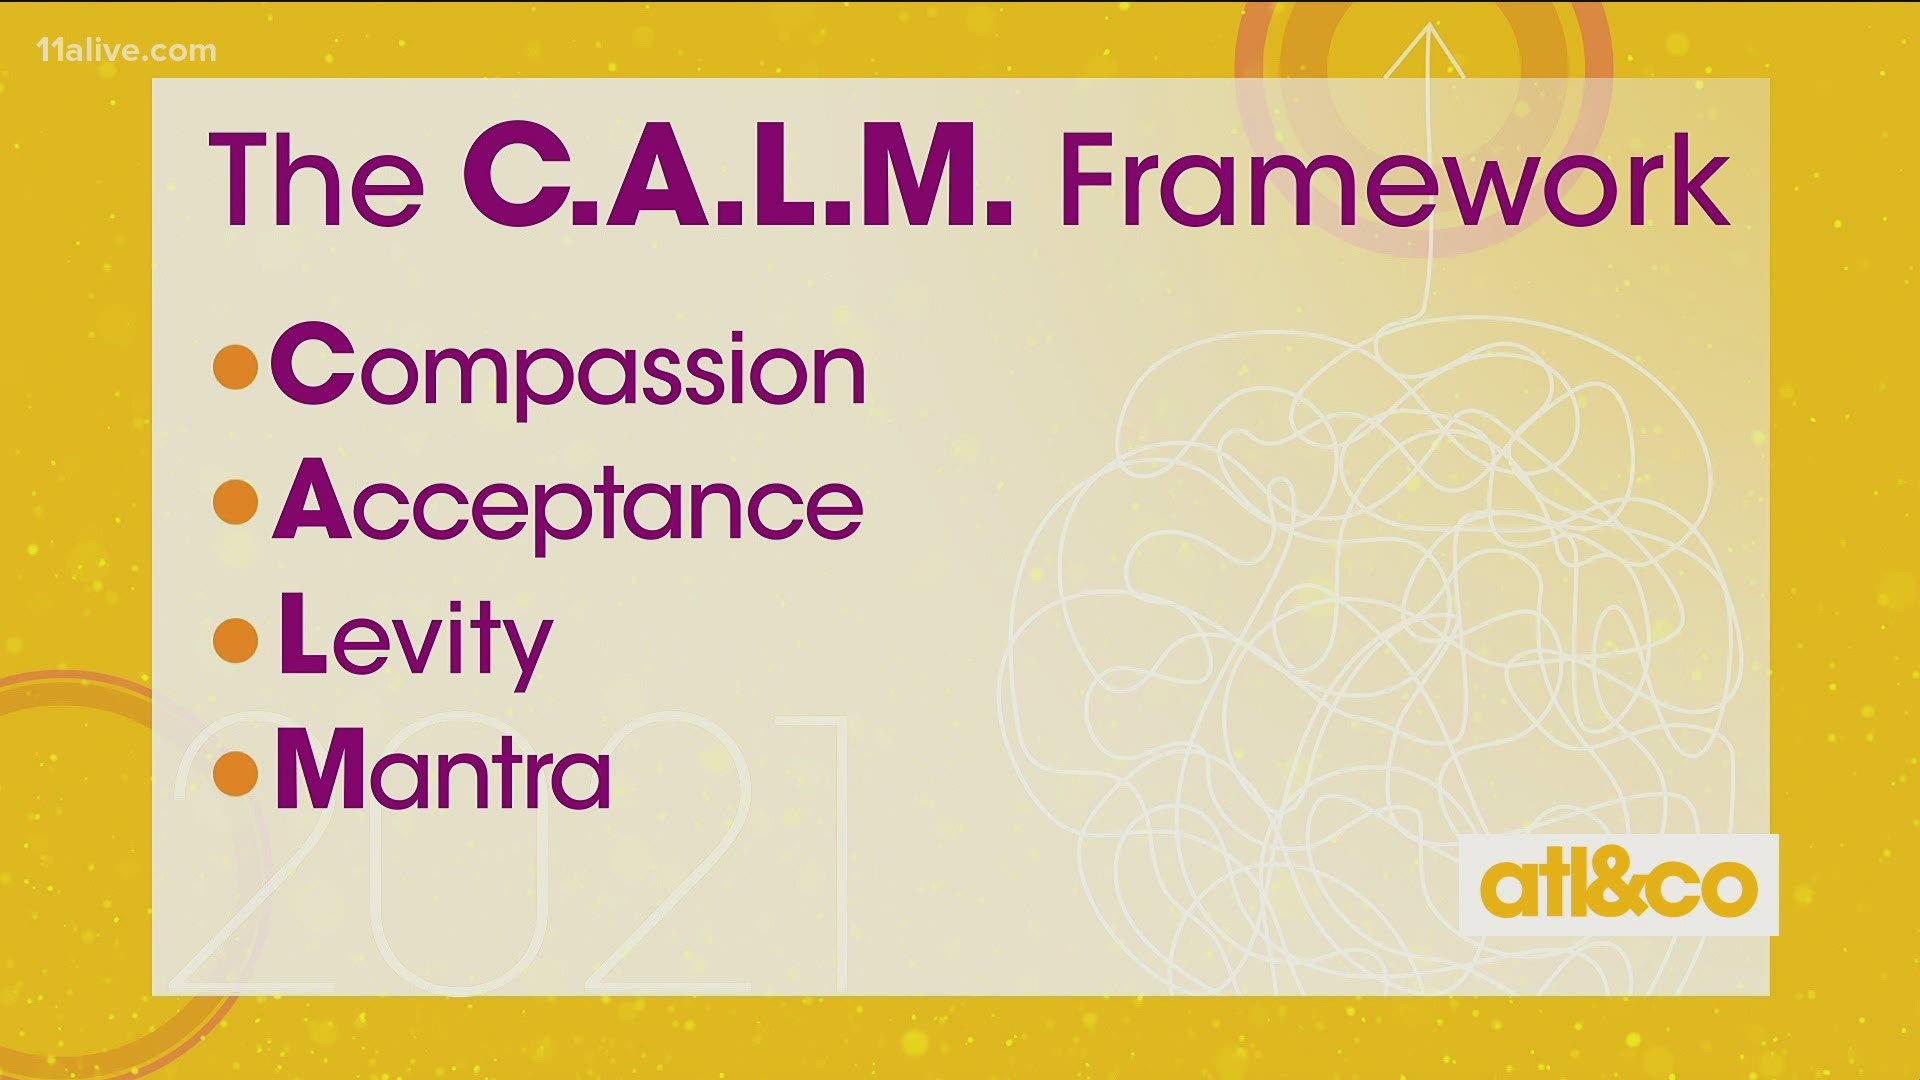 The C.A.L.M. Framework! Transformational life coach Jen Mintz shares 4 simple ways to embrace change and step into this New Year feeling empowered.